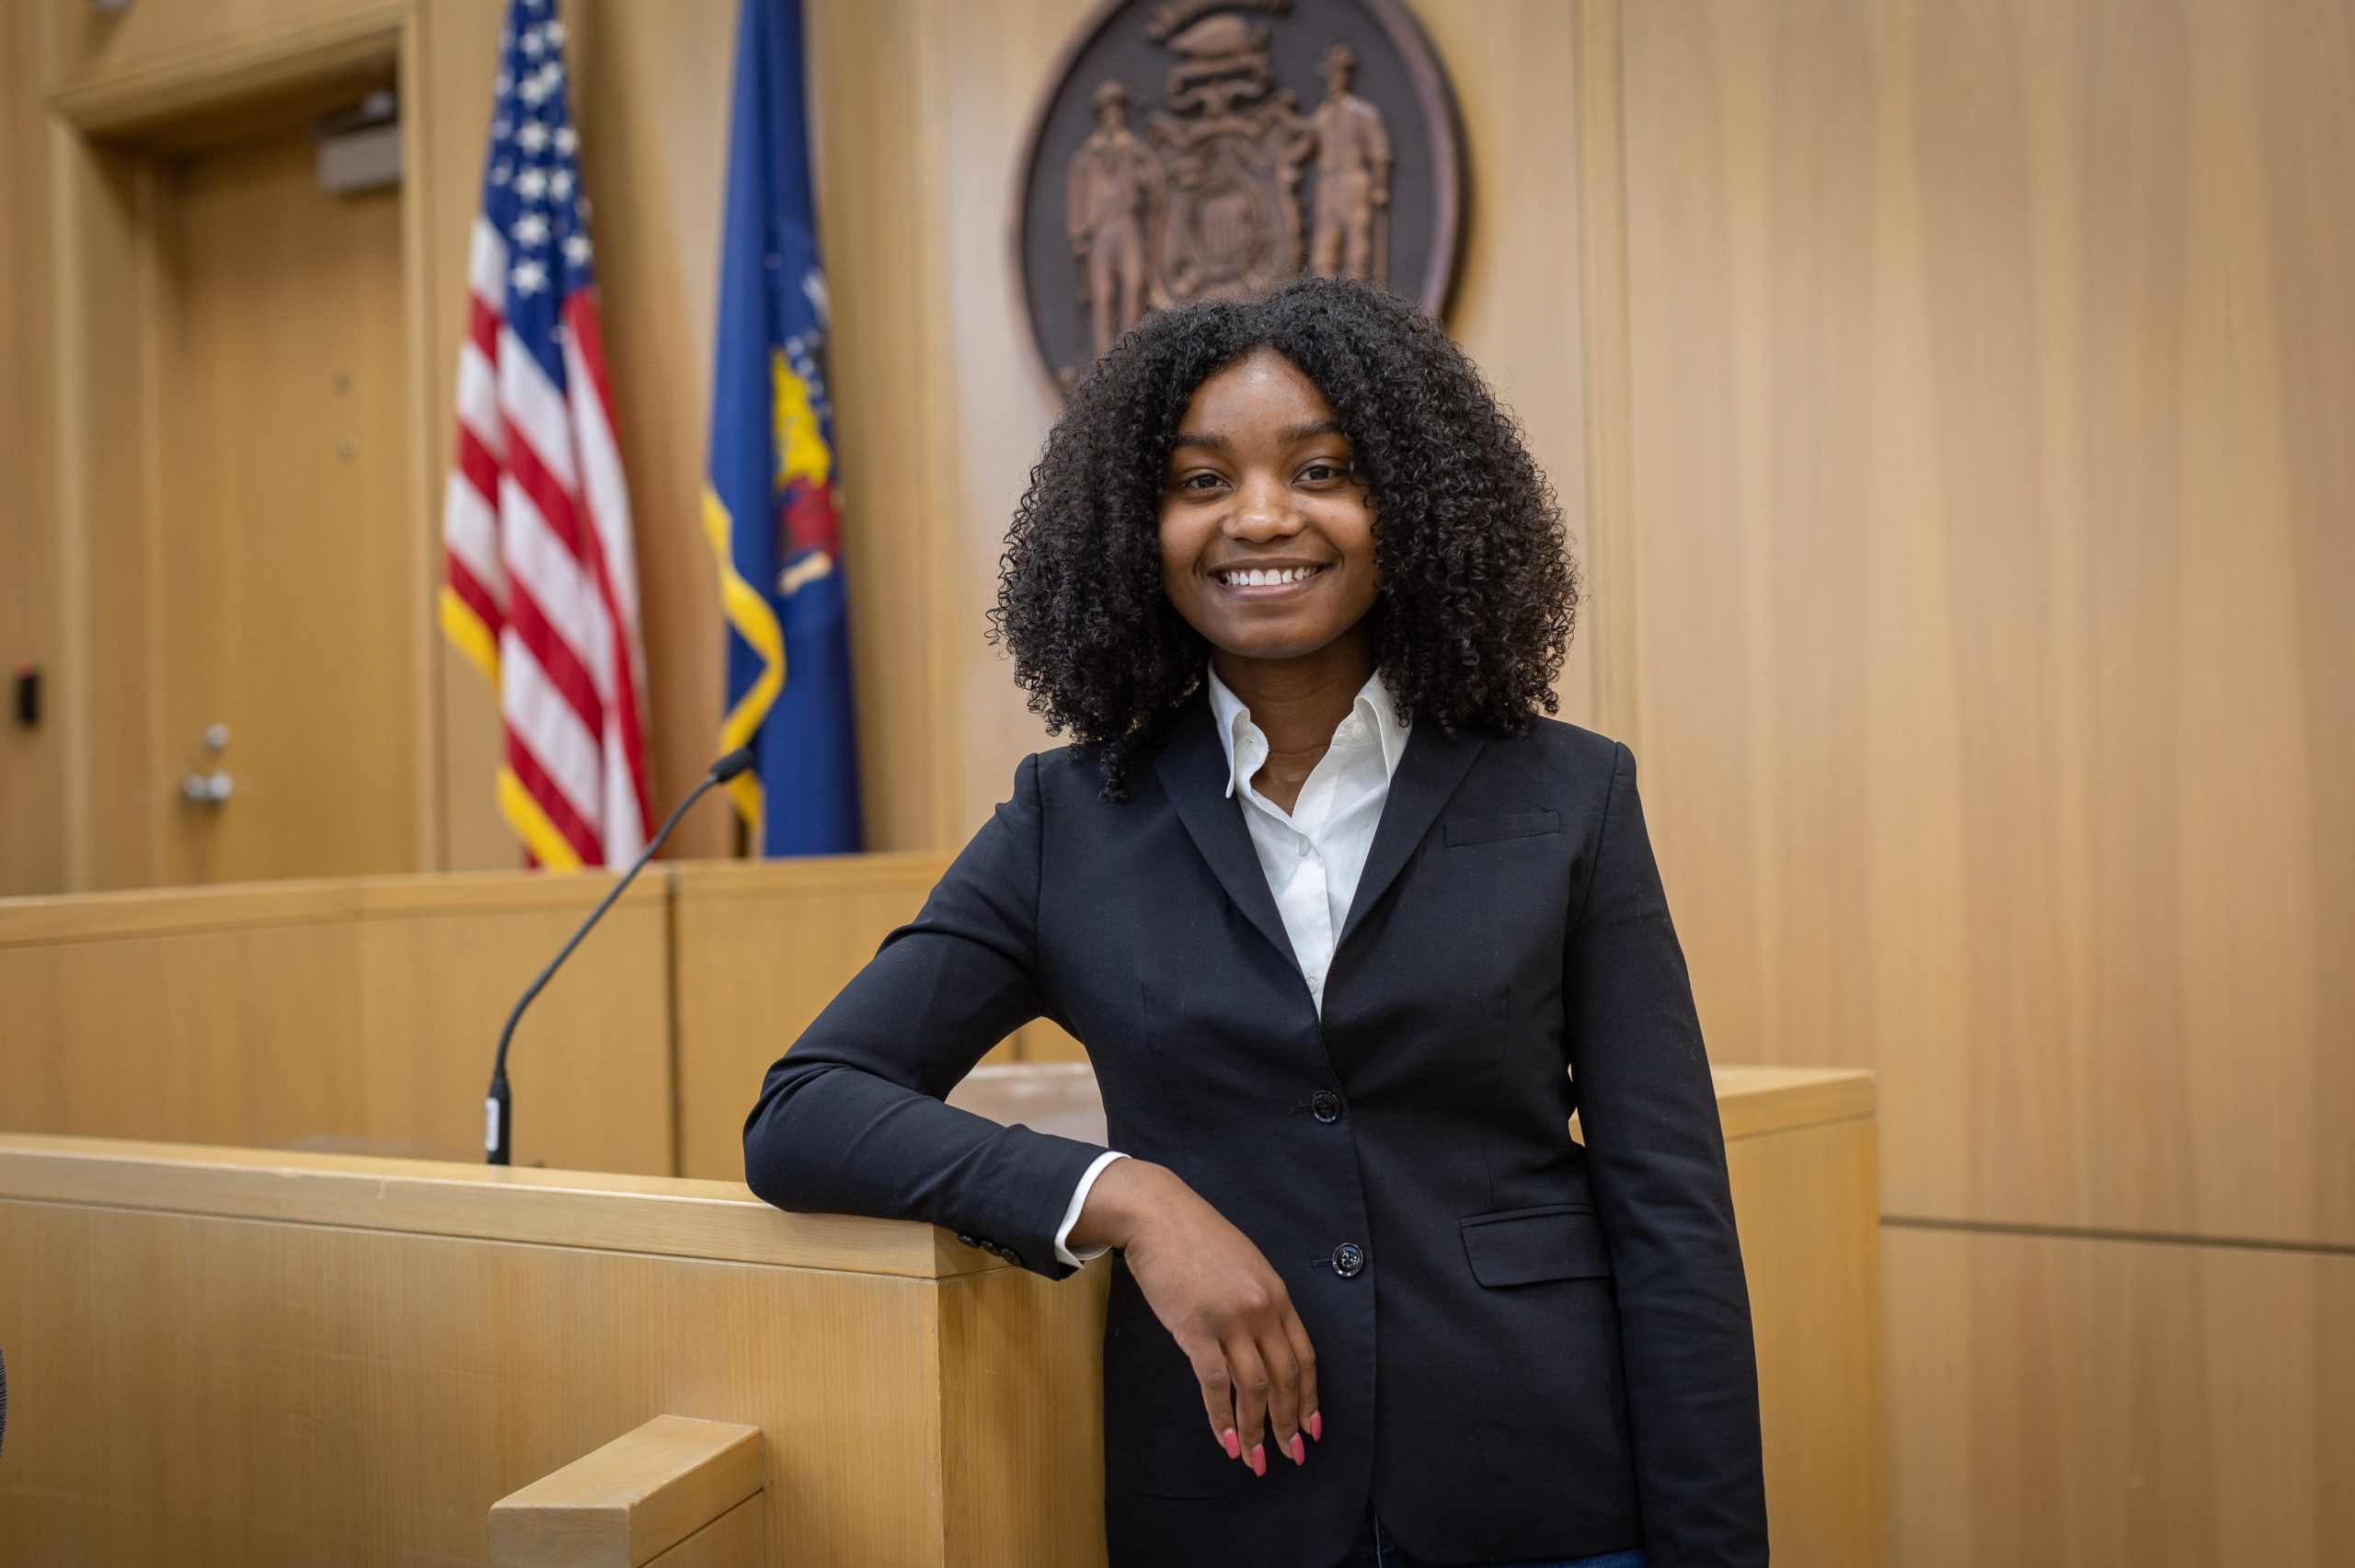 May graduate Destiny Lloyd received $135,000 in scholarships to pursue law at George Washington University.